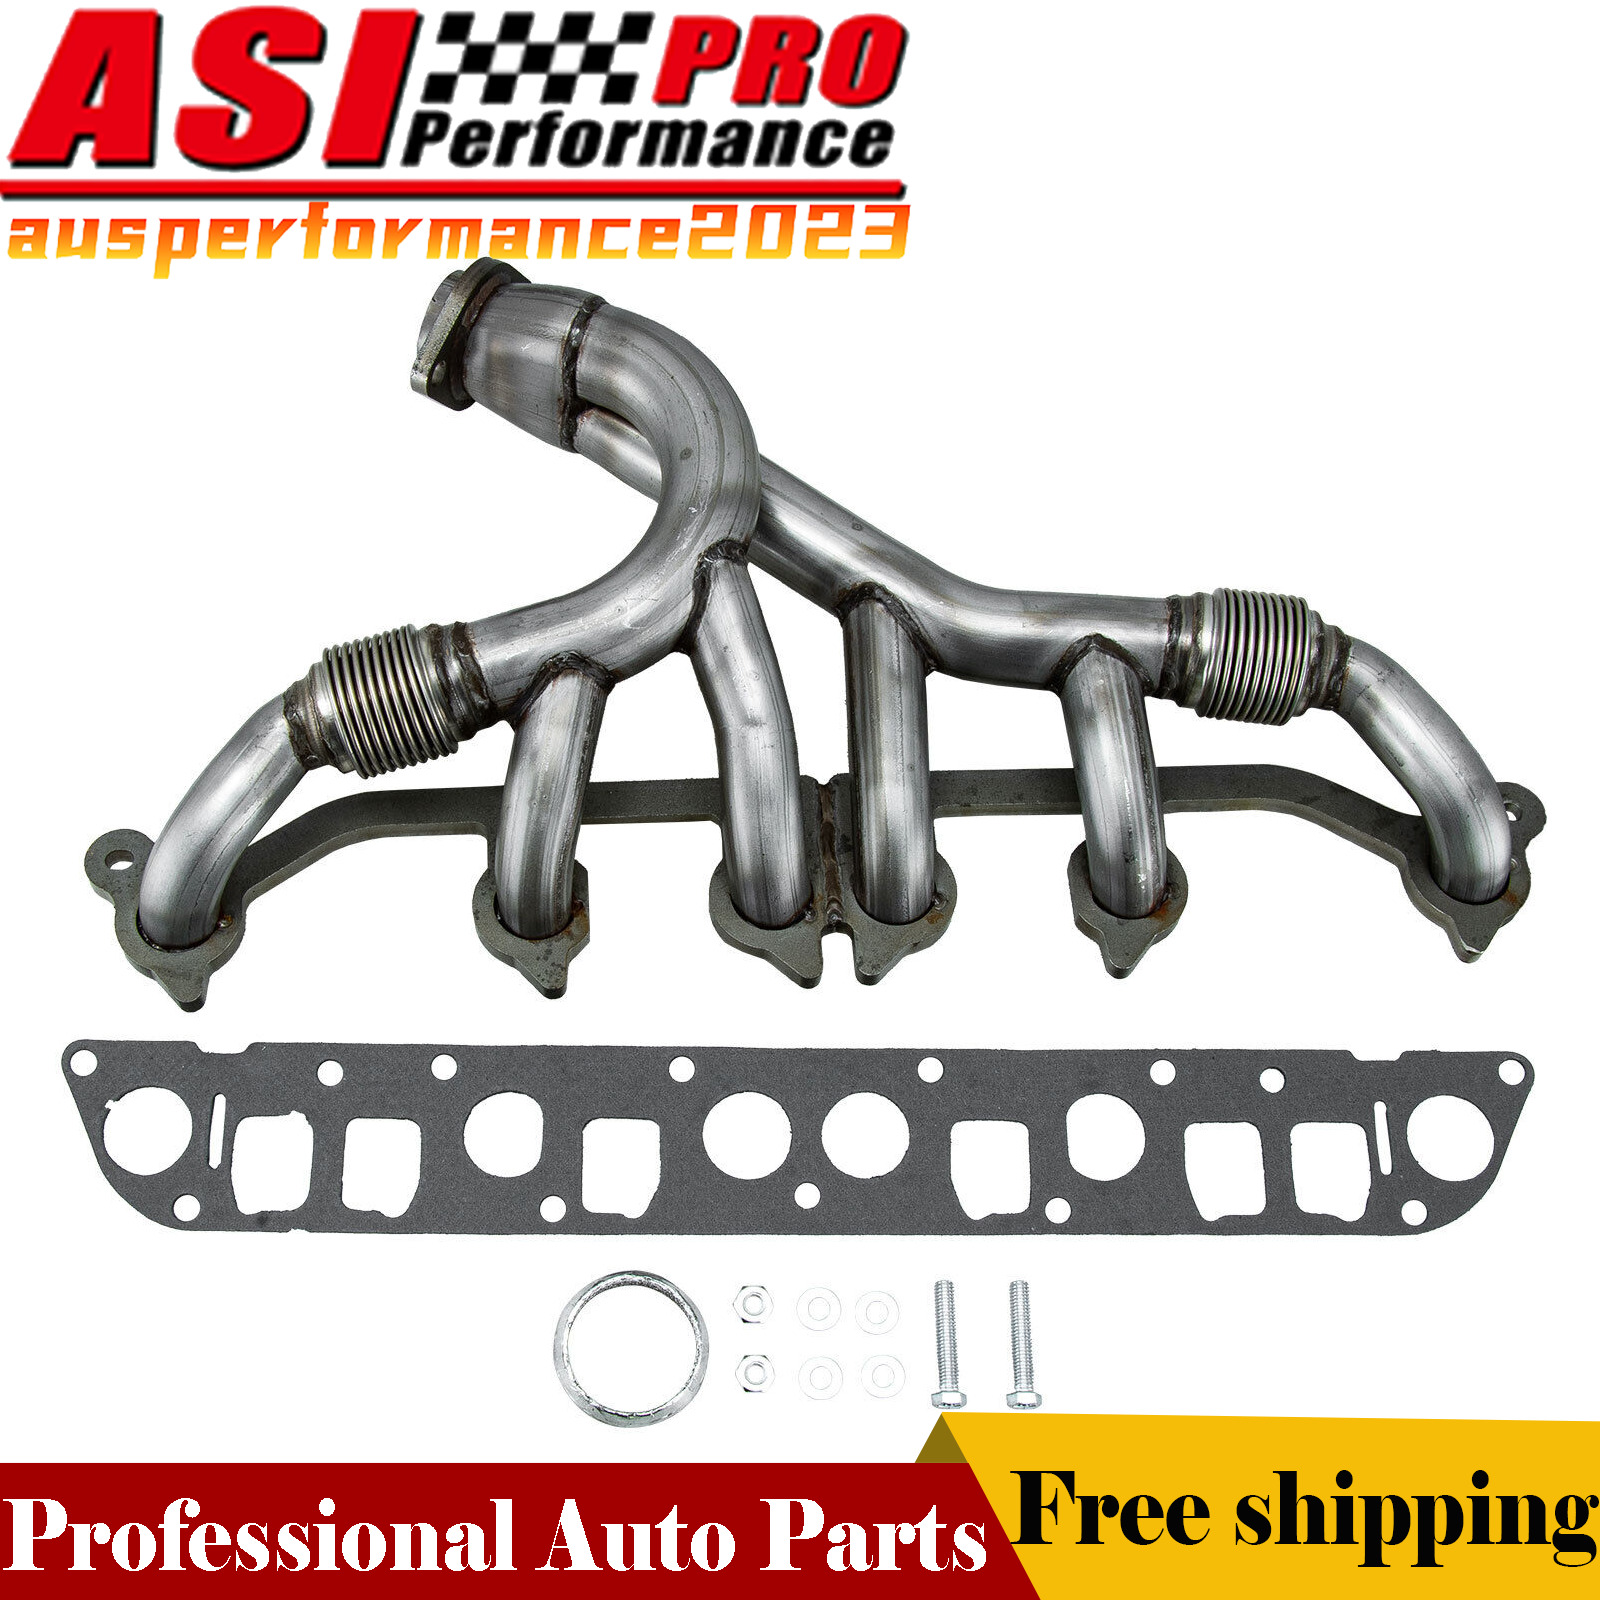 S/S Exhaust Manifold& Gasket Kit for 1991-1999 Jeep Grand Cherokee Wrangler 4.0L